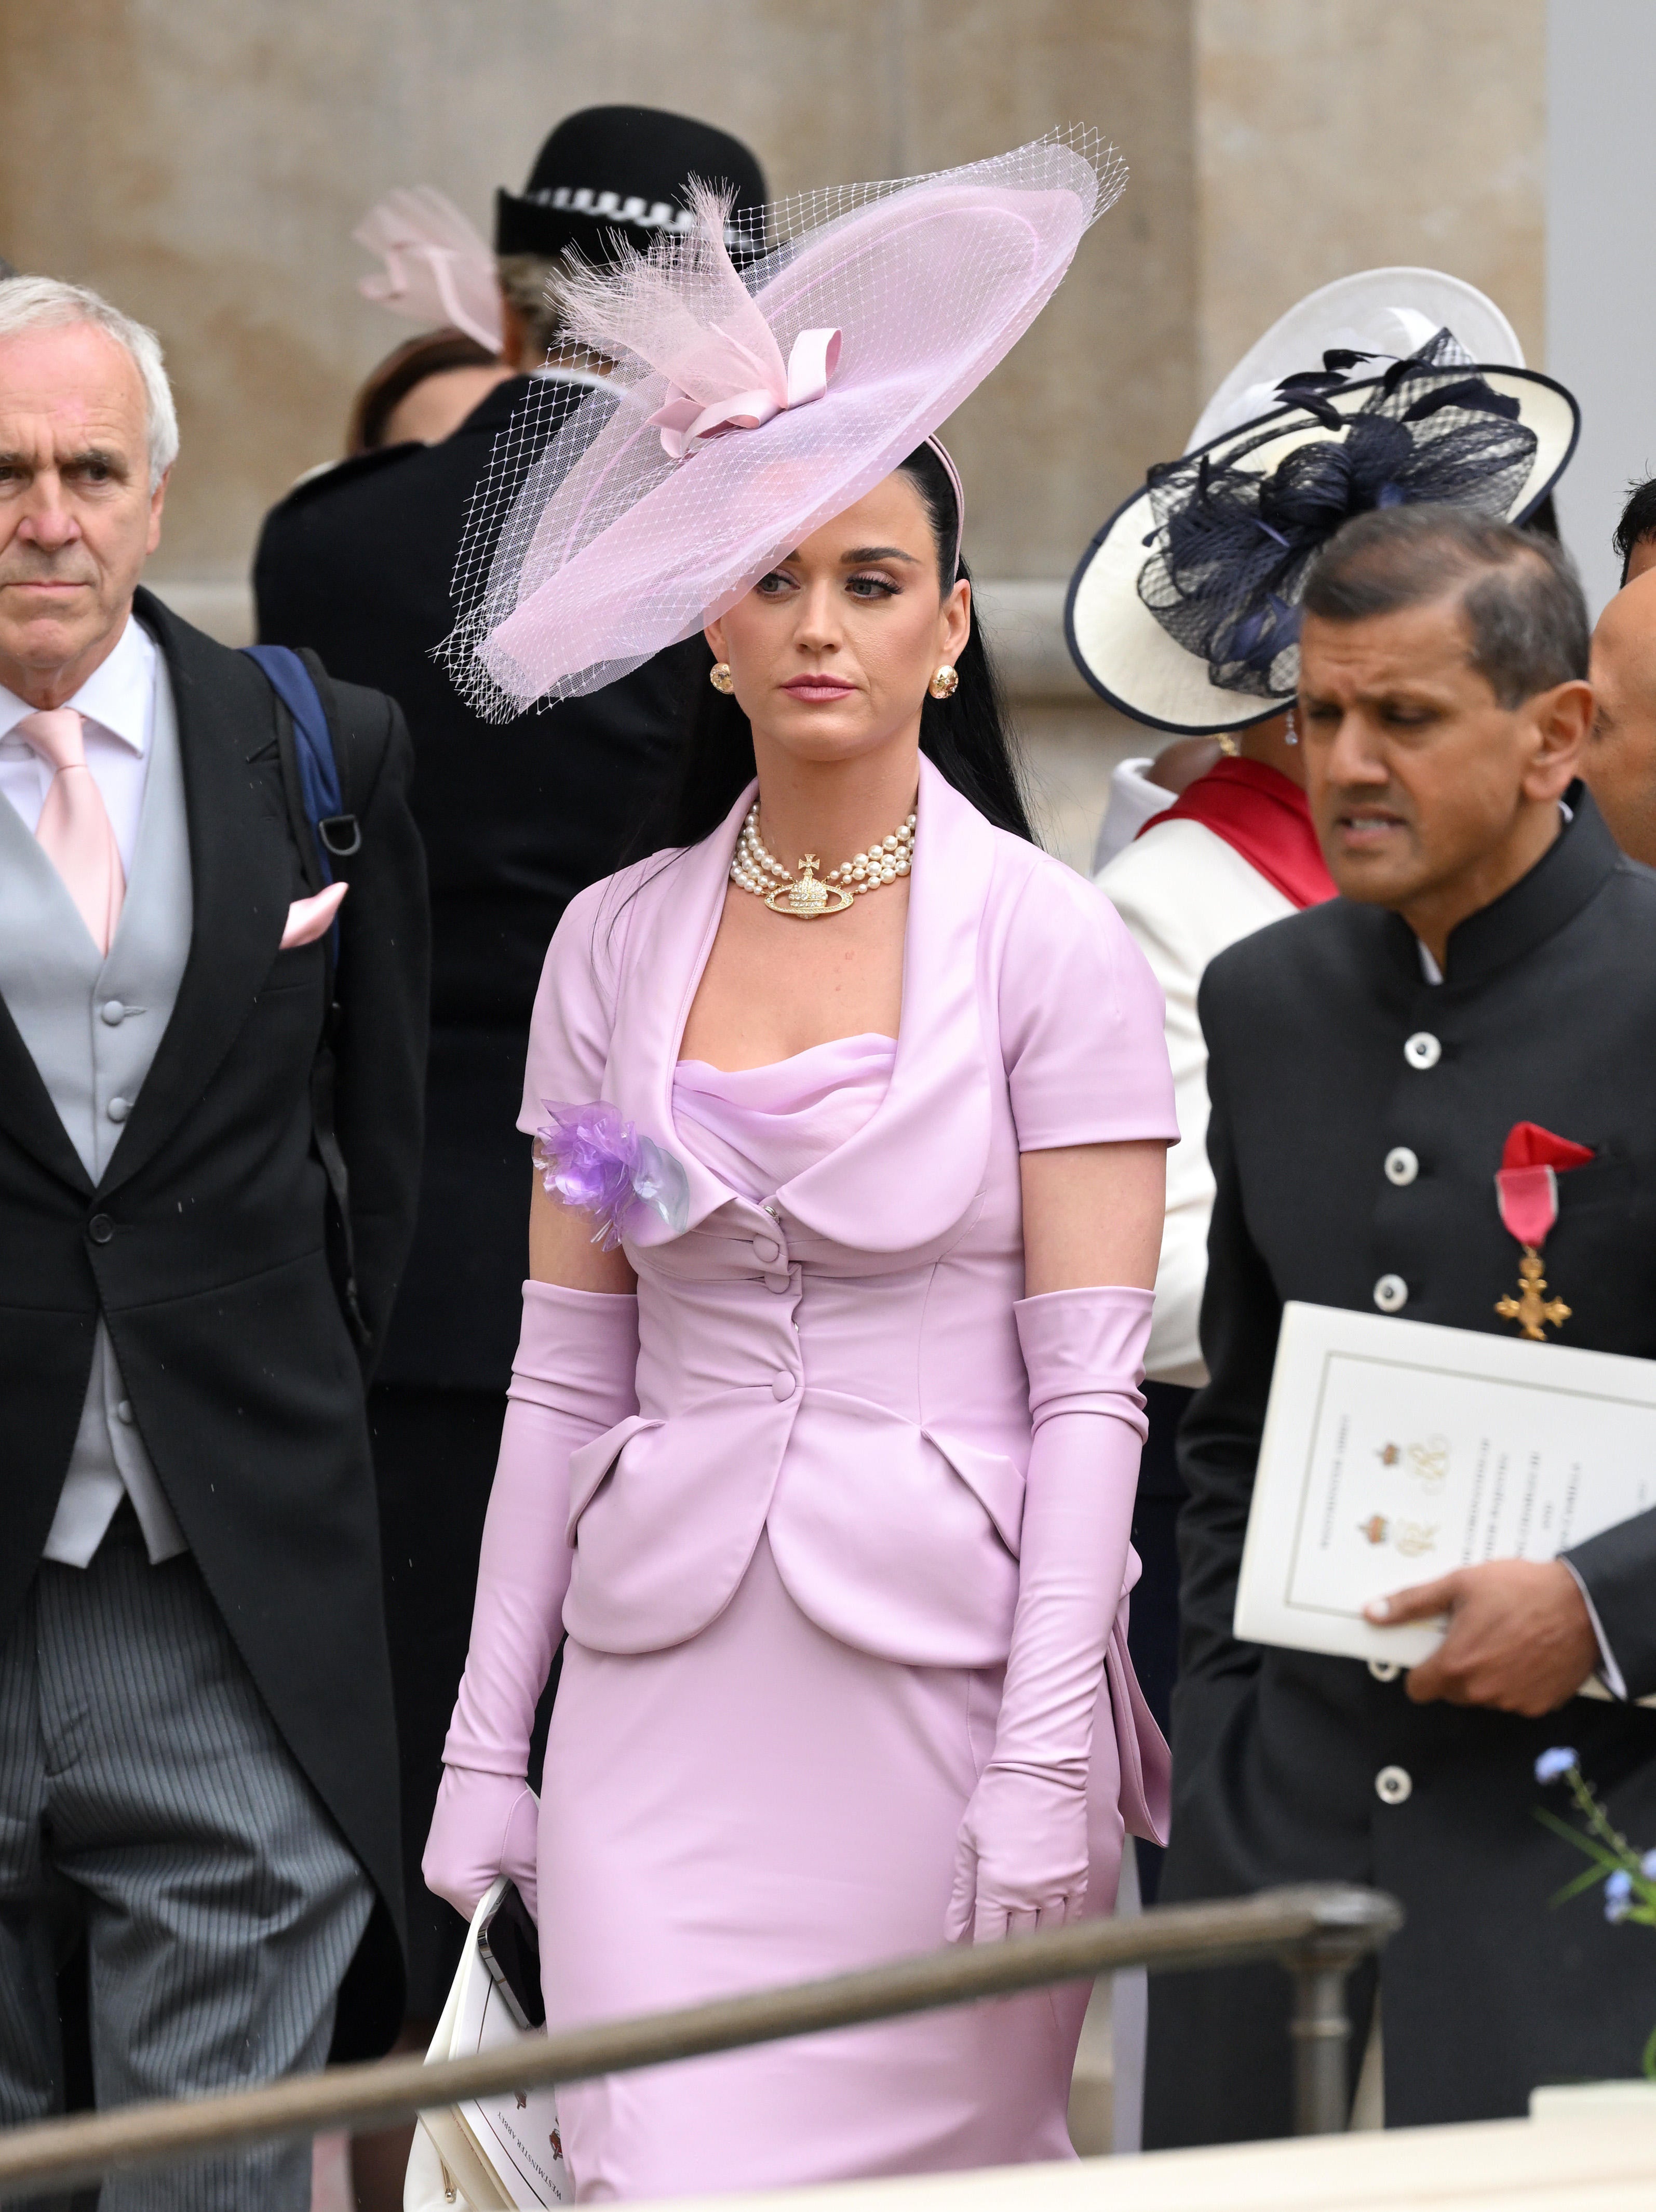 Katy Perry makes a statement in corseted look at the coronation